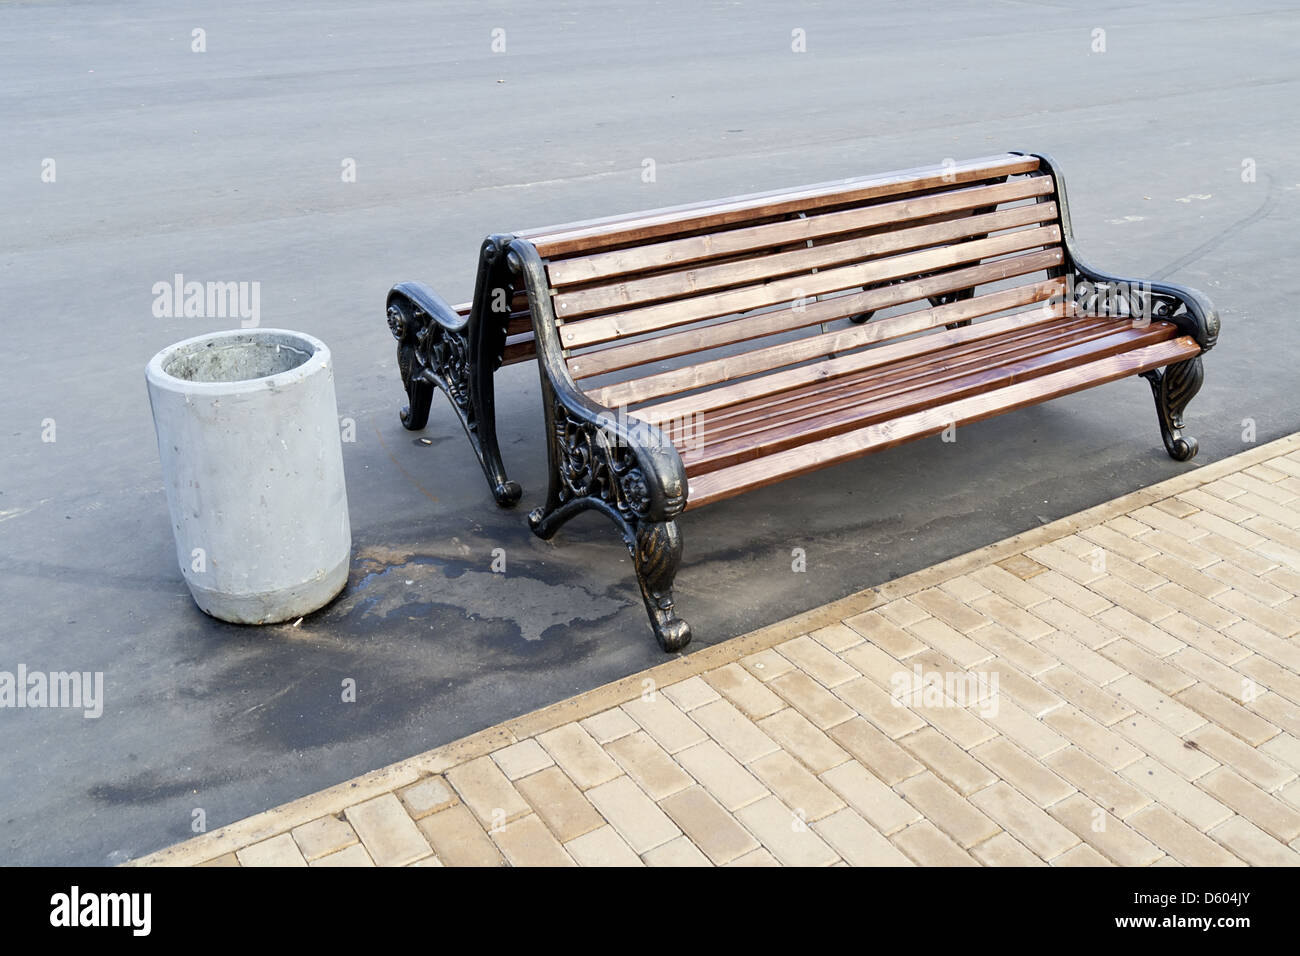 a bench to rest in a public city park Stock Photo